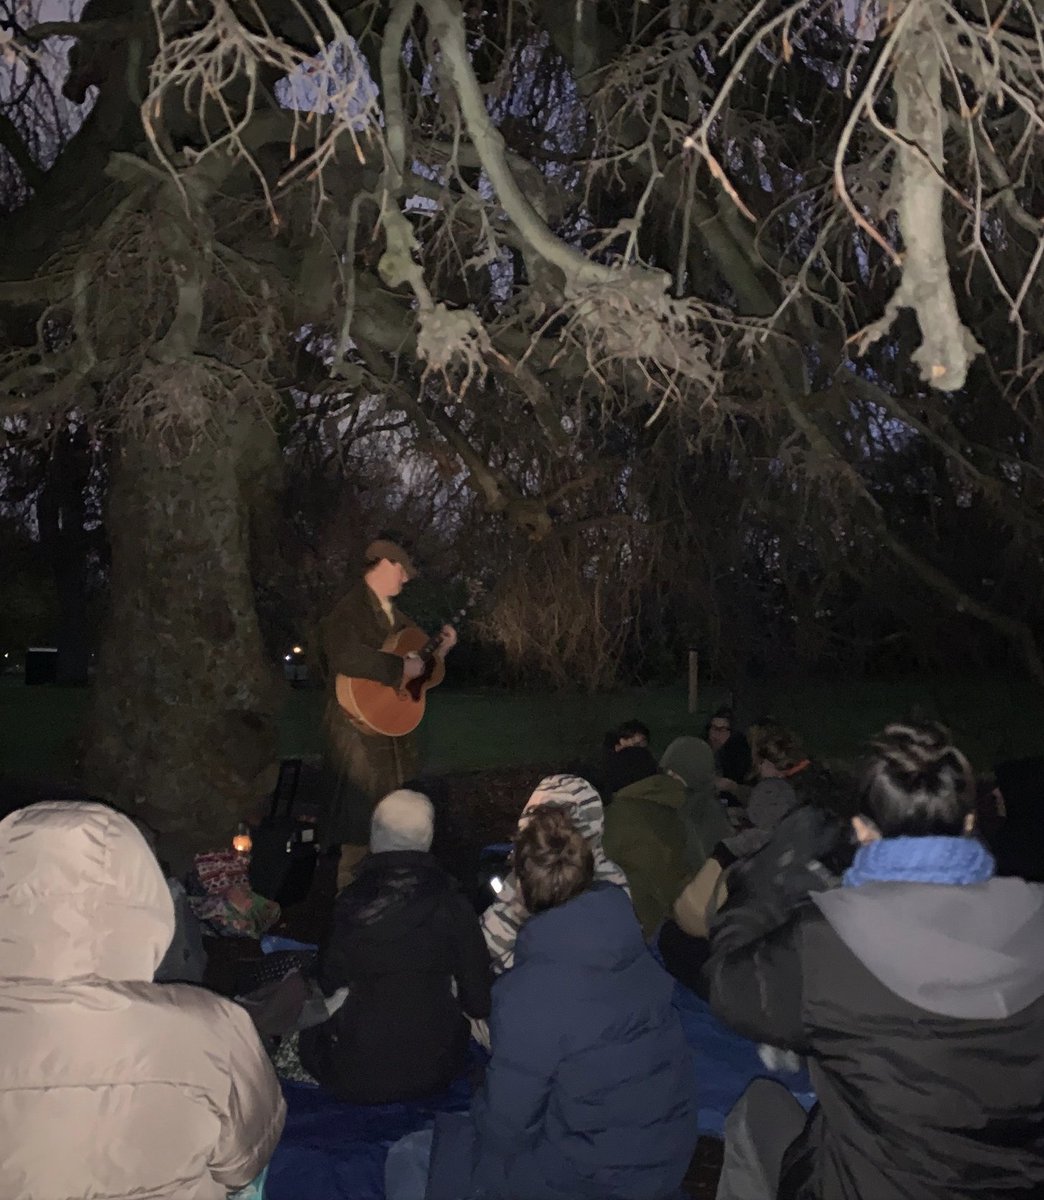 Lost Among The Trees, our storytelling collab w @theroyalparks was truly epic tonight! Thanks so much to all the hardy souls who joined us in the storm. We listened to wild music and terrifying tales as the branches twisted around us. Can’t wait for next time. w @folk_cunning